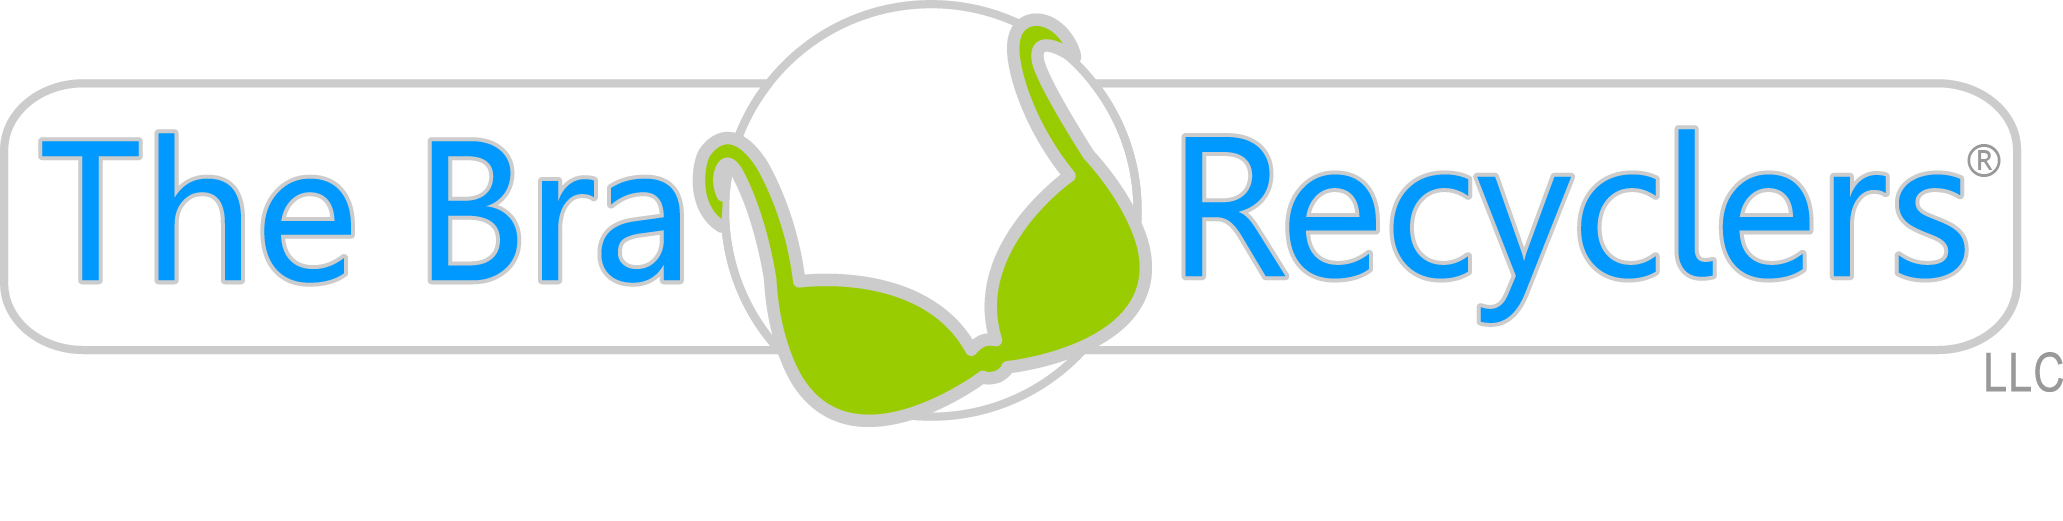 The Bra Recyclers - Our Bra Recycling Ambassadors want to